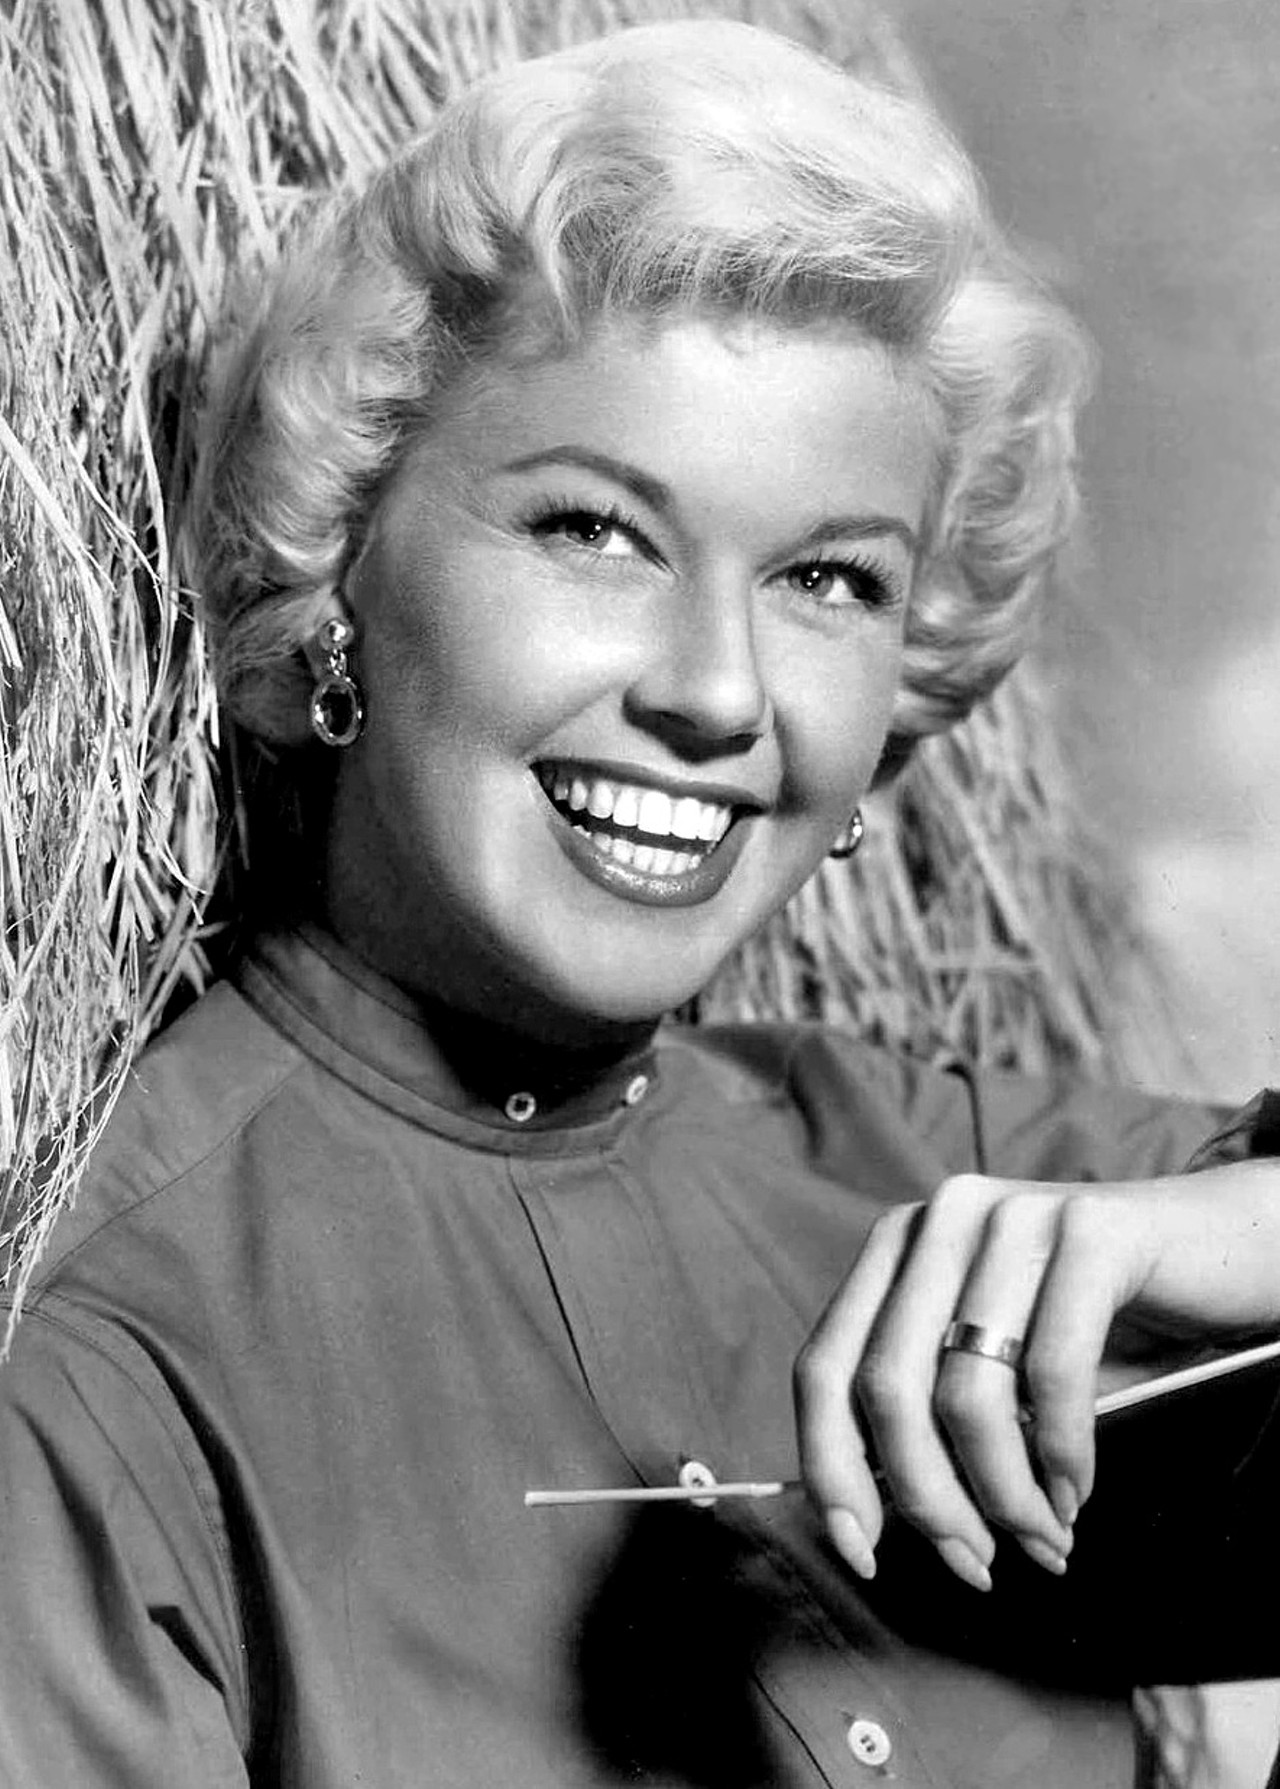 Doris Day
Formerly known as Doris Mary Anne Kappelhoff, Day was a well-known actress, singer and animal welfare activist. She was born in Cincinnati in 1922 and went to Our Lady of Angels High School in St. Bernard. Some of the most popular films she starred in include Pillow Talk and The Man Who Knew Too Much.